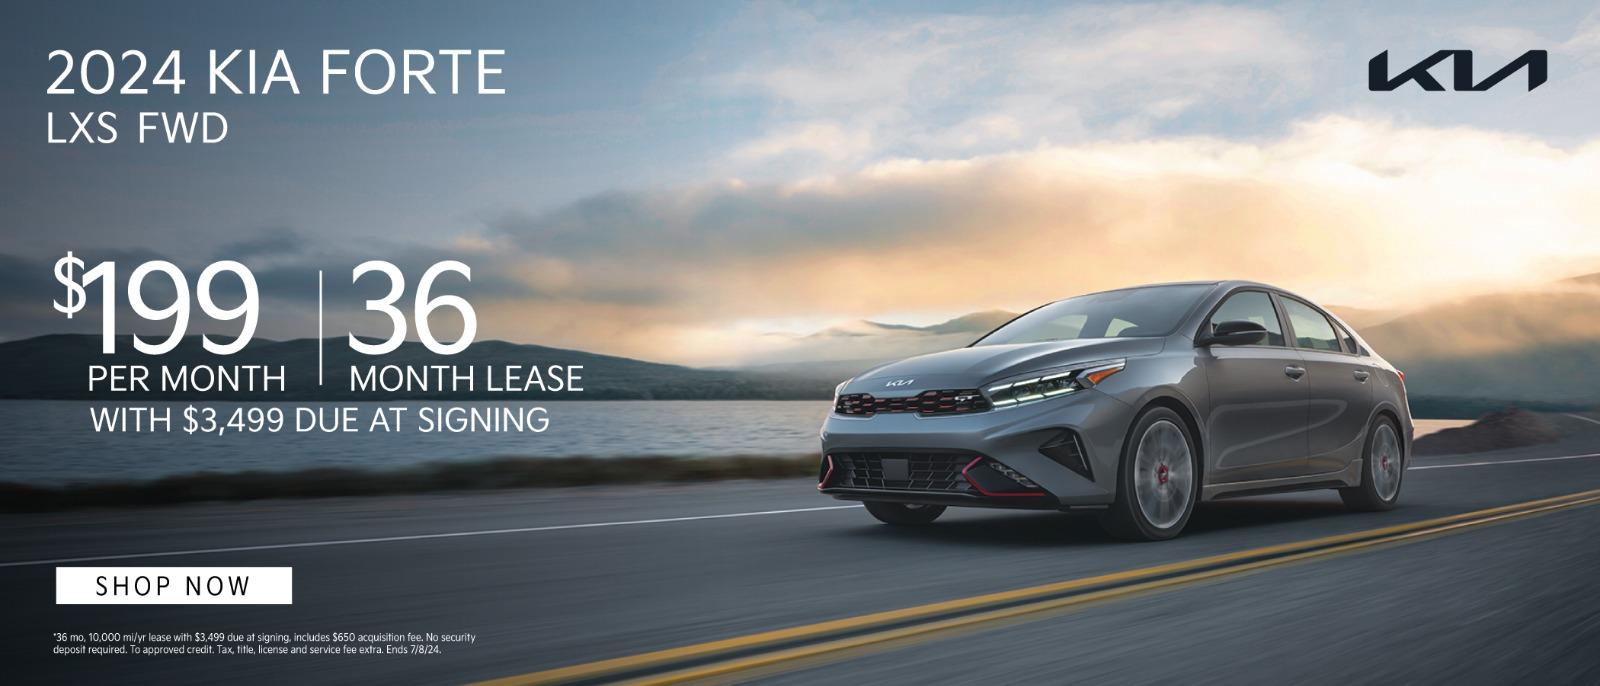 2024 Kia Forte LXS lease for $199 per month for 36 months